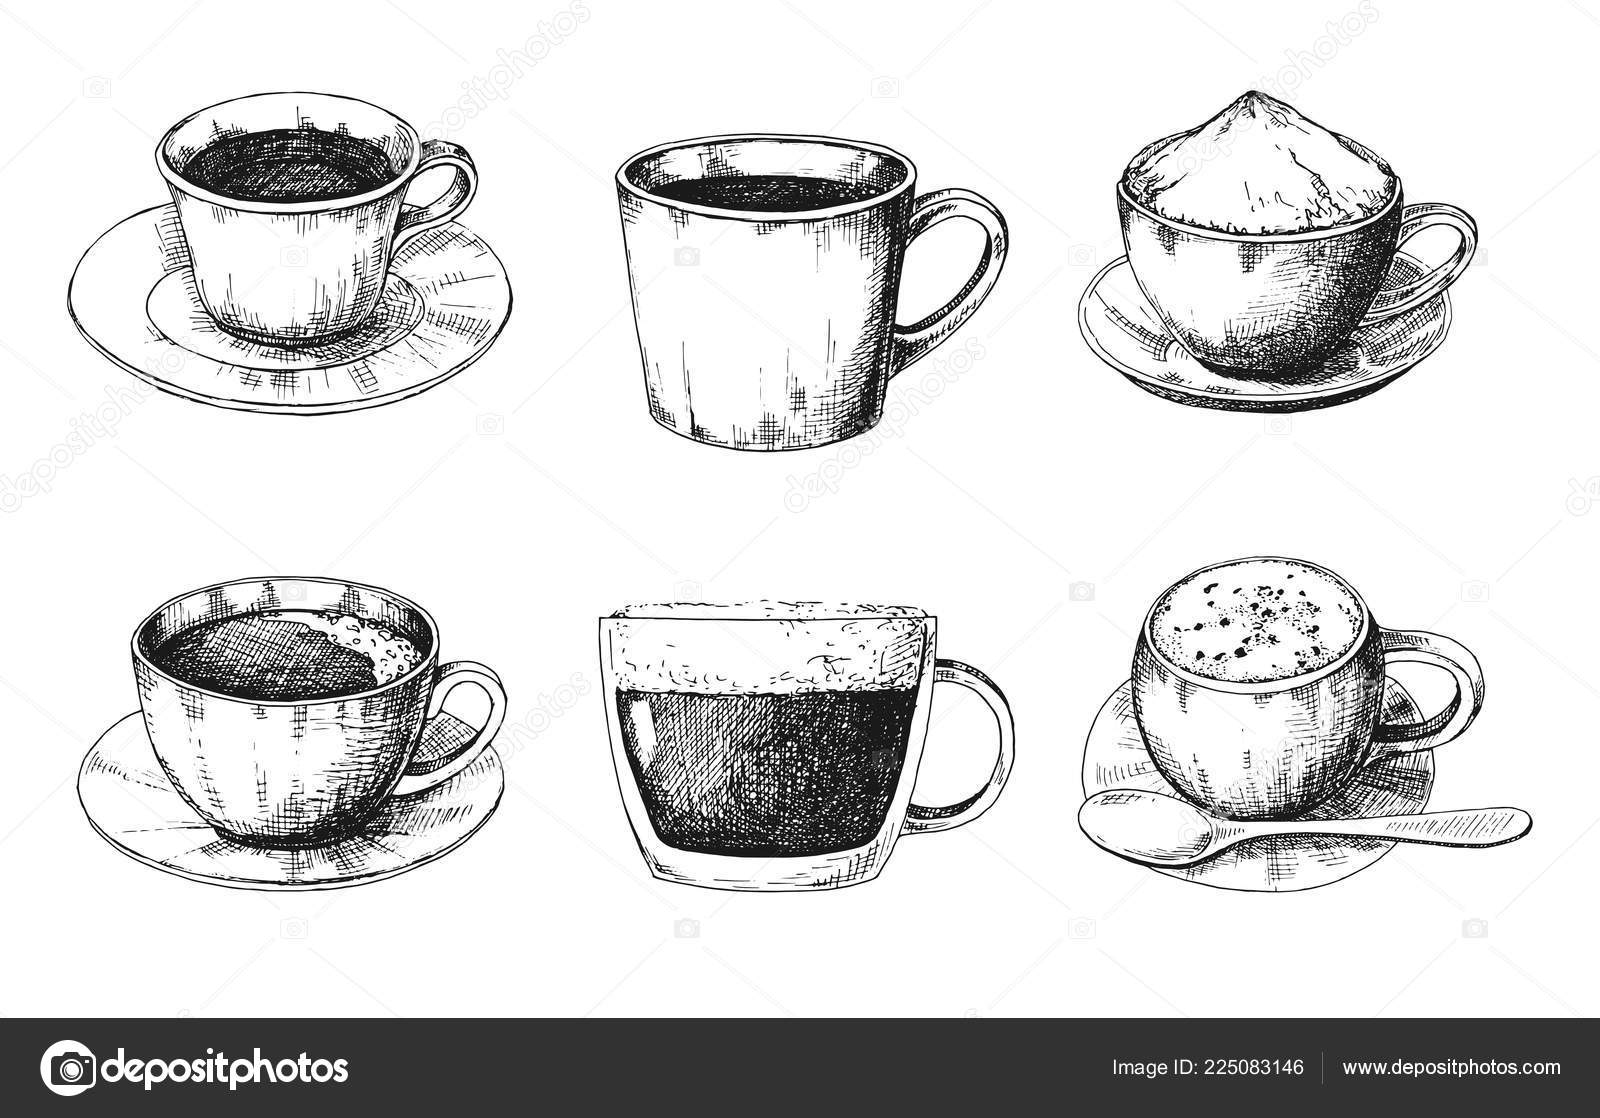 ArtStation - Cups observational drawing